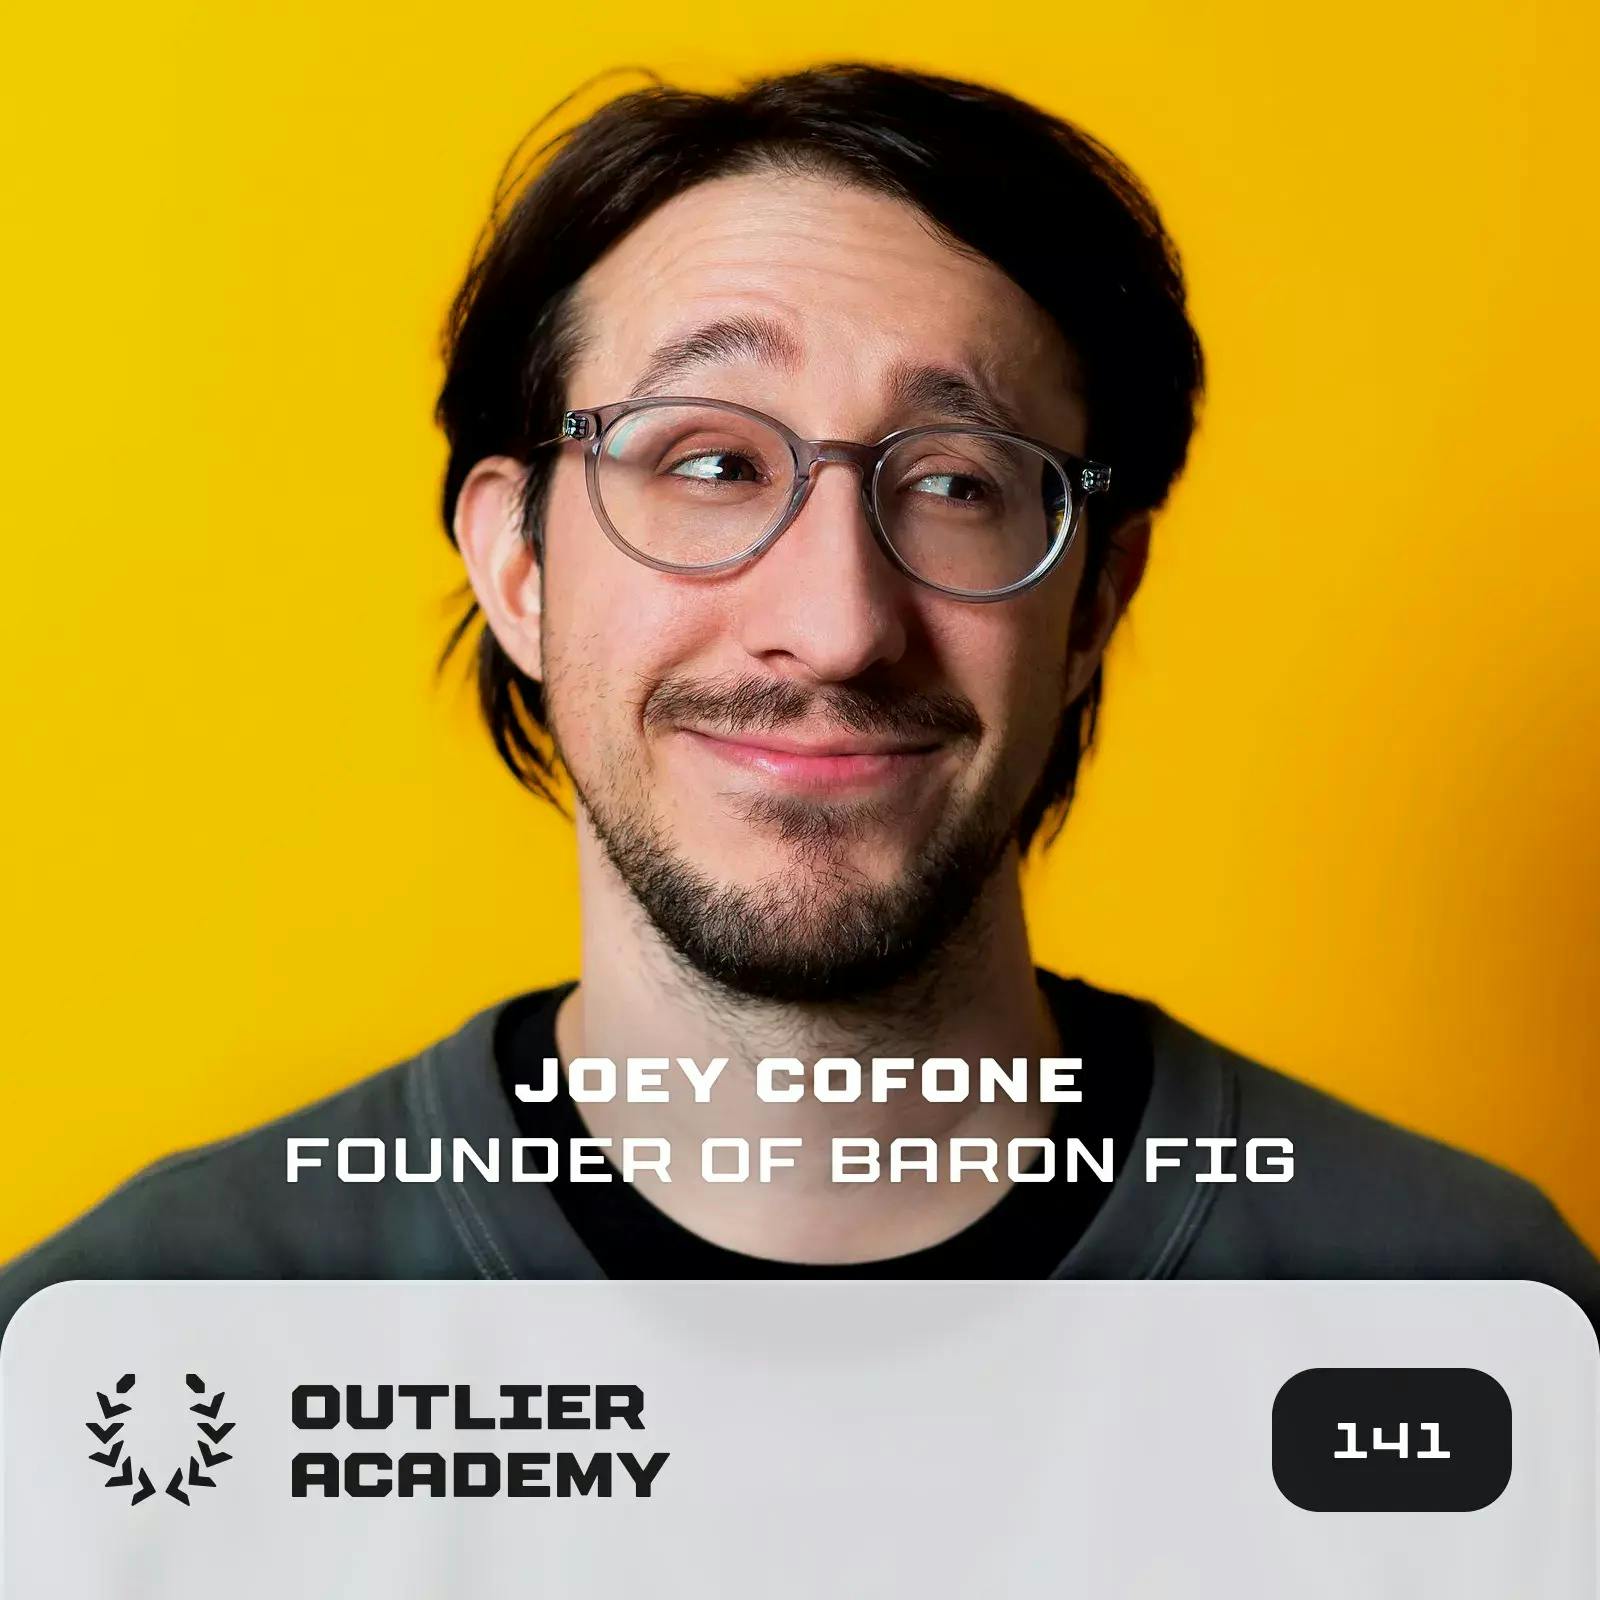 Best Books & Authors in 2022 –  Joey Cofone (Favorite Baronfig Products, Skill vs Renown, Daily Disciplines, Favorite Books, and More) Image